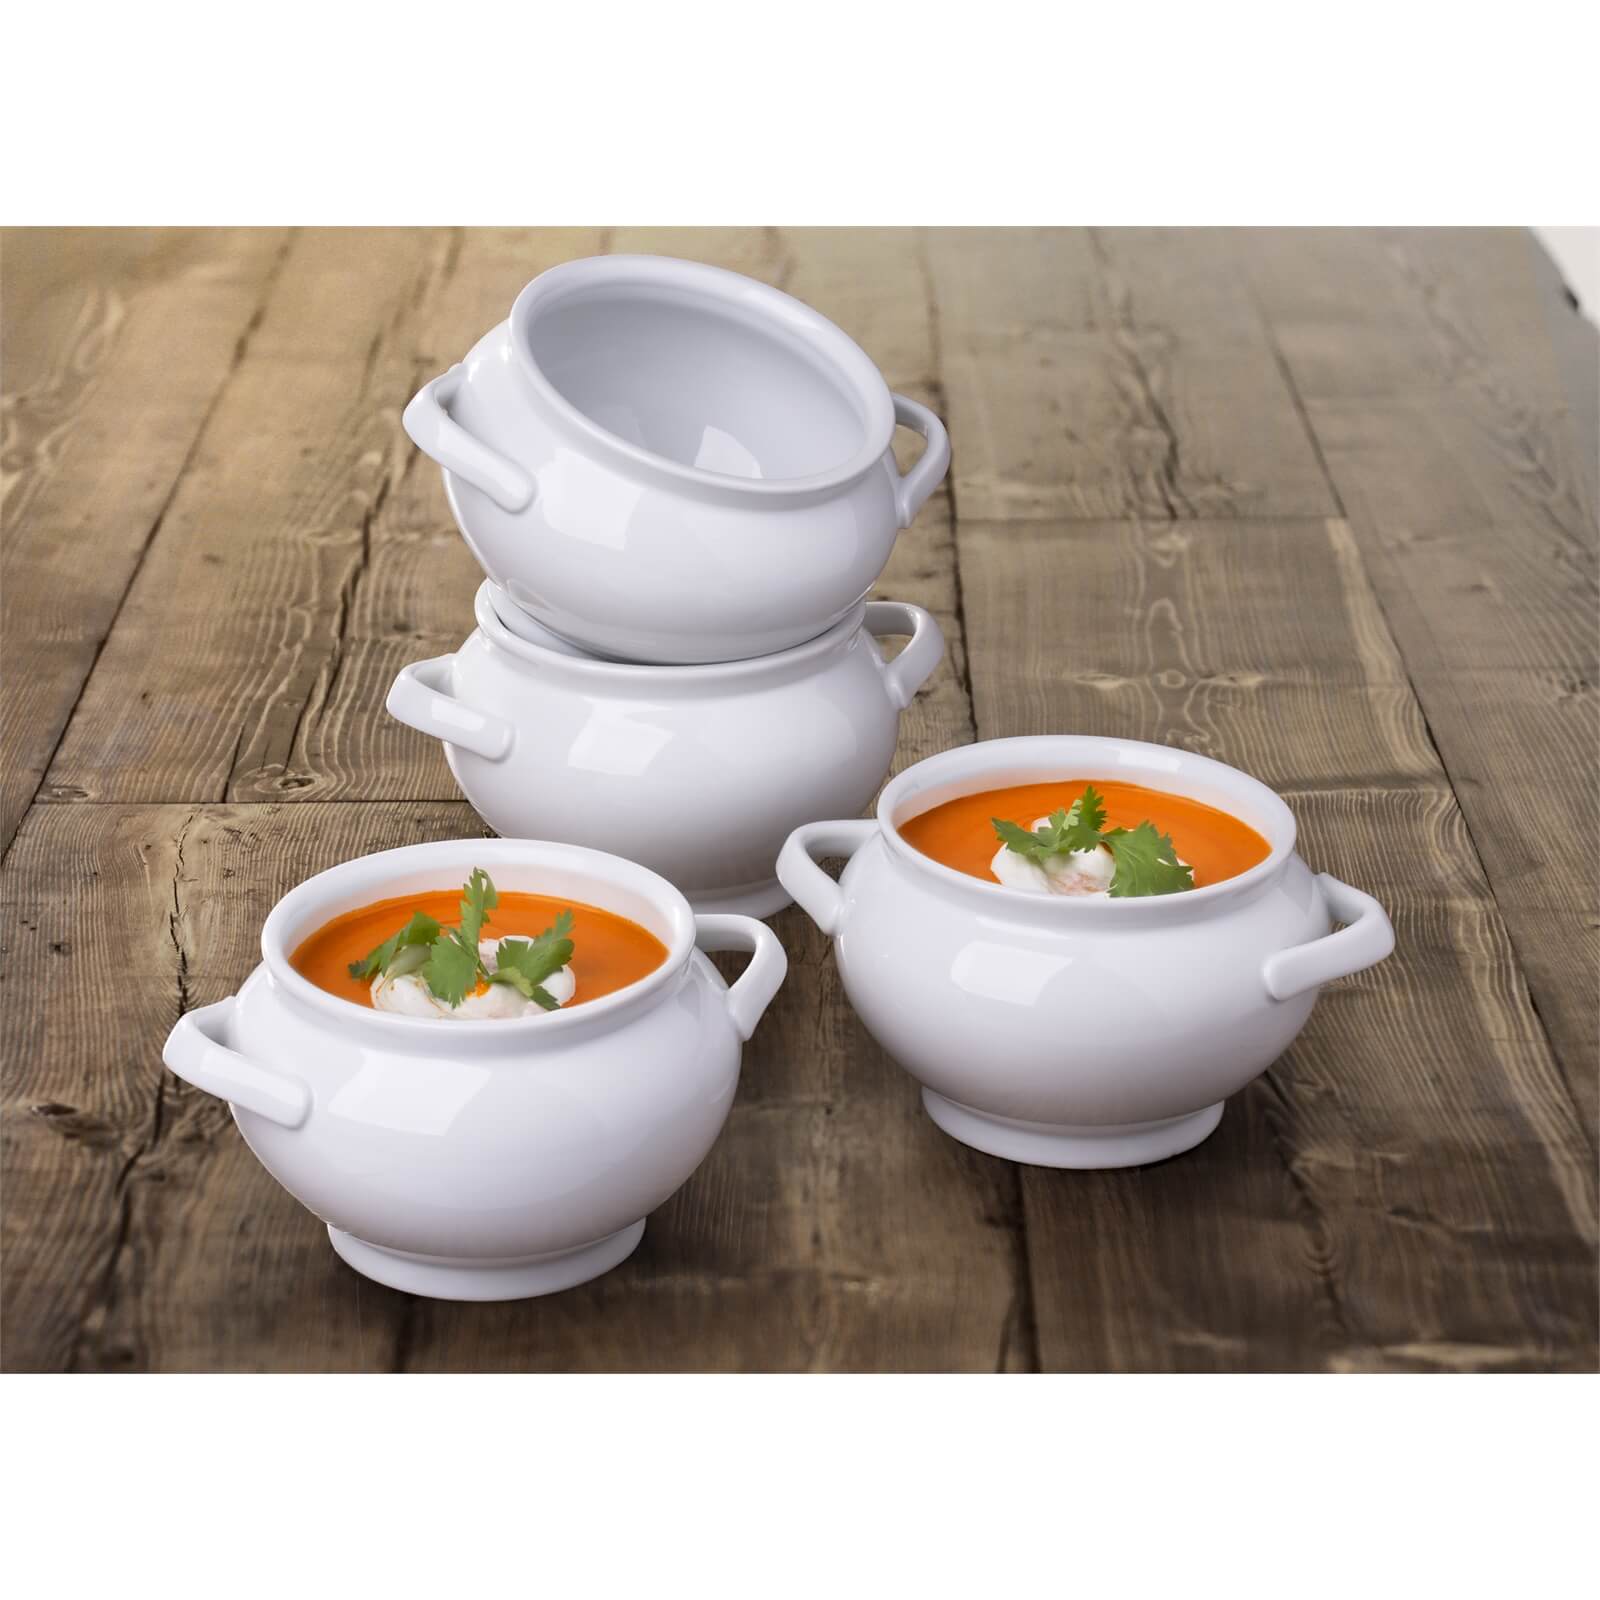 Set of 4 Deep Soup Bowls with 2 Handles - White